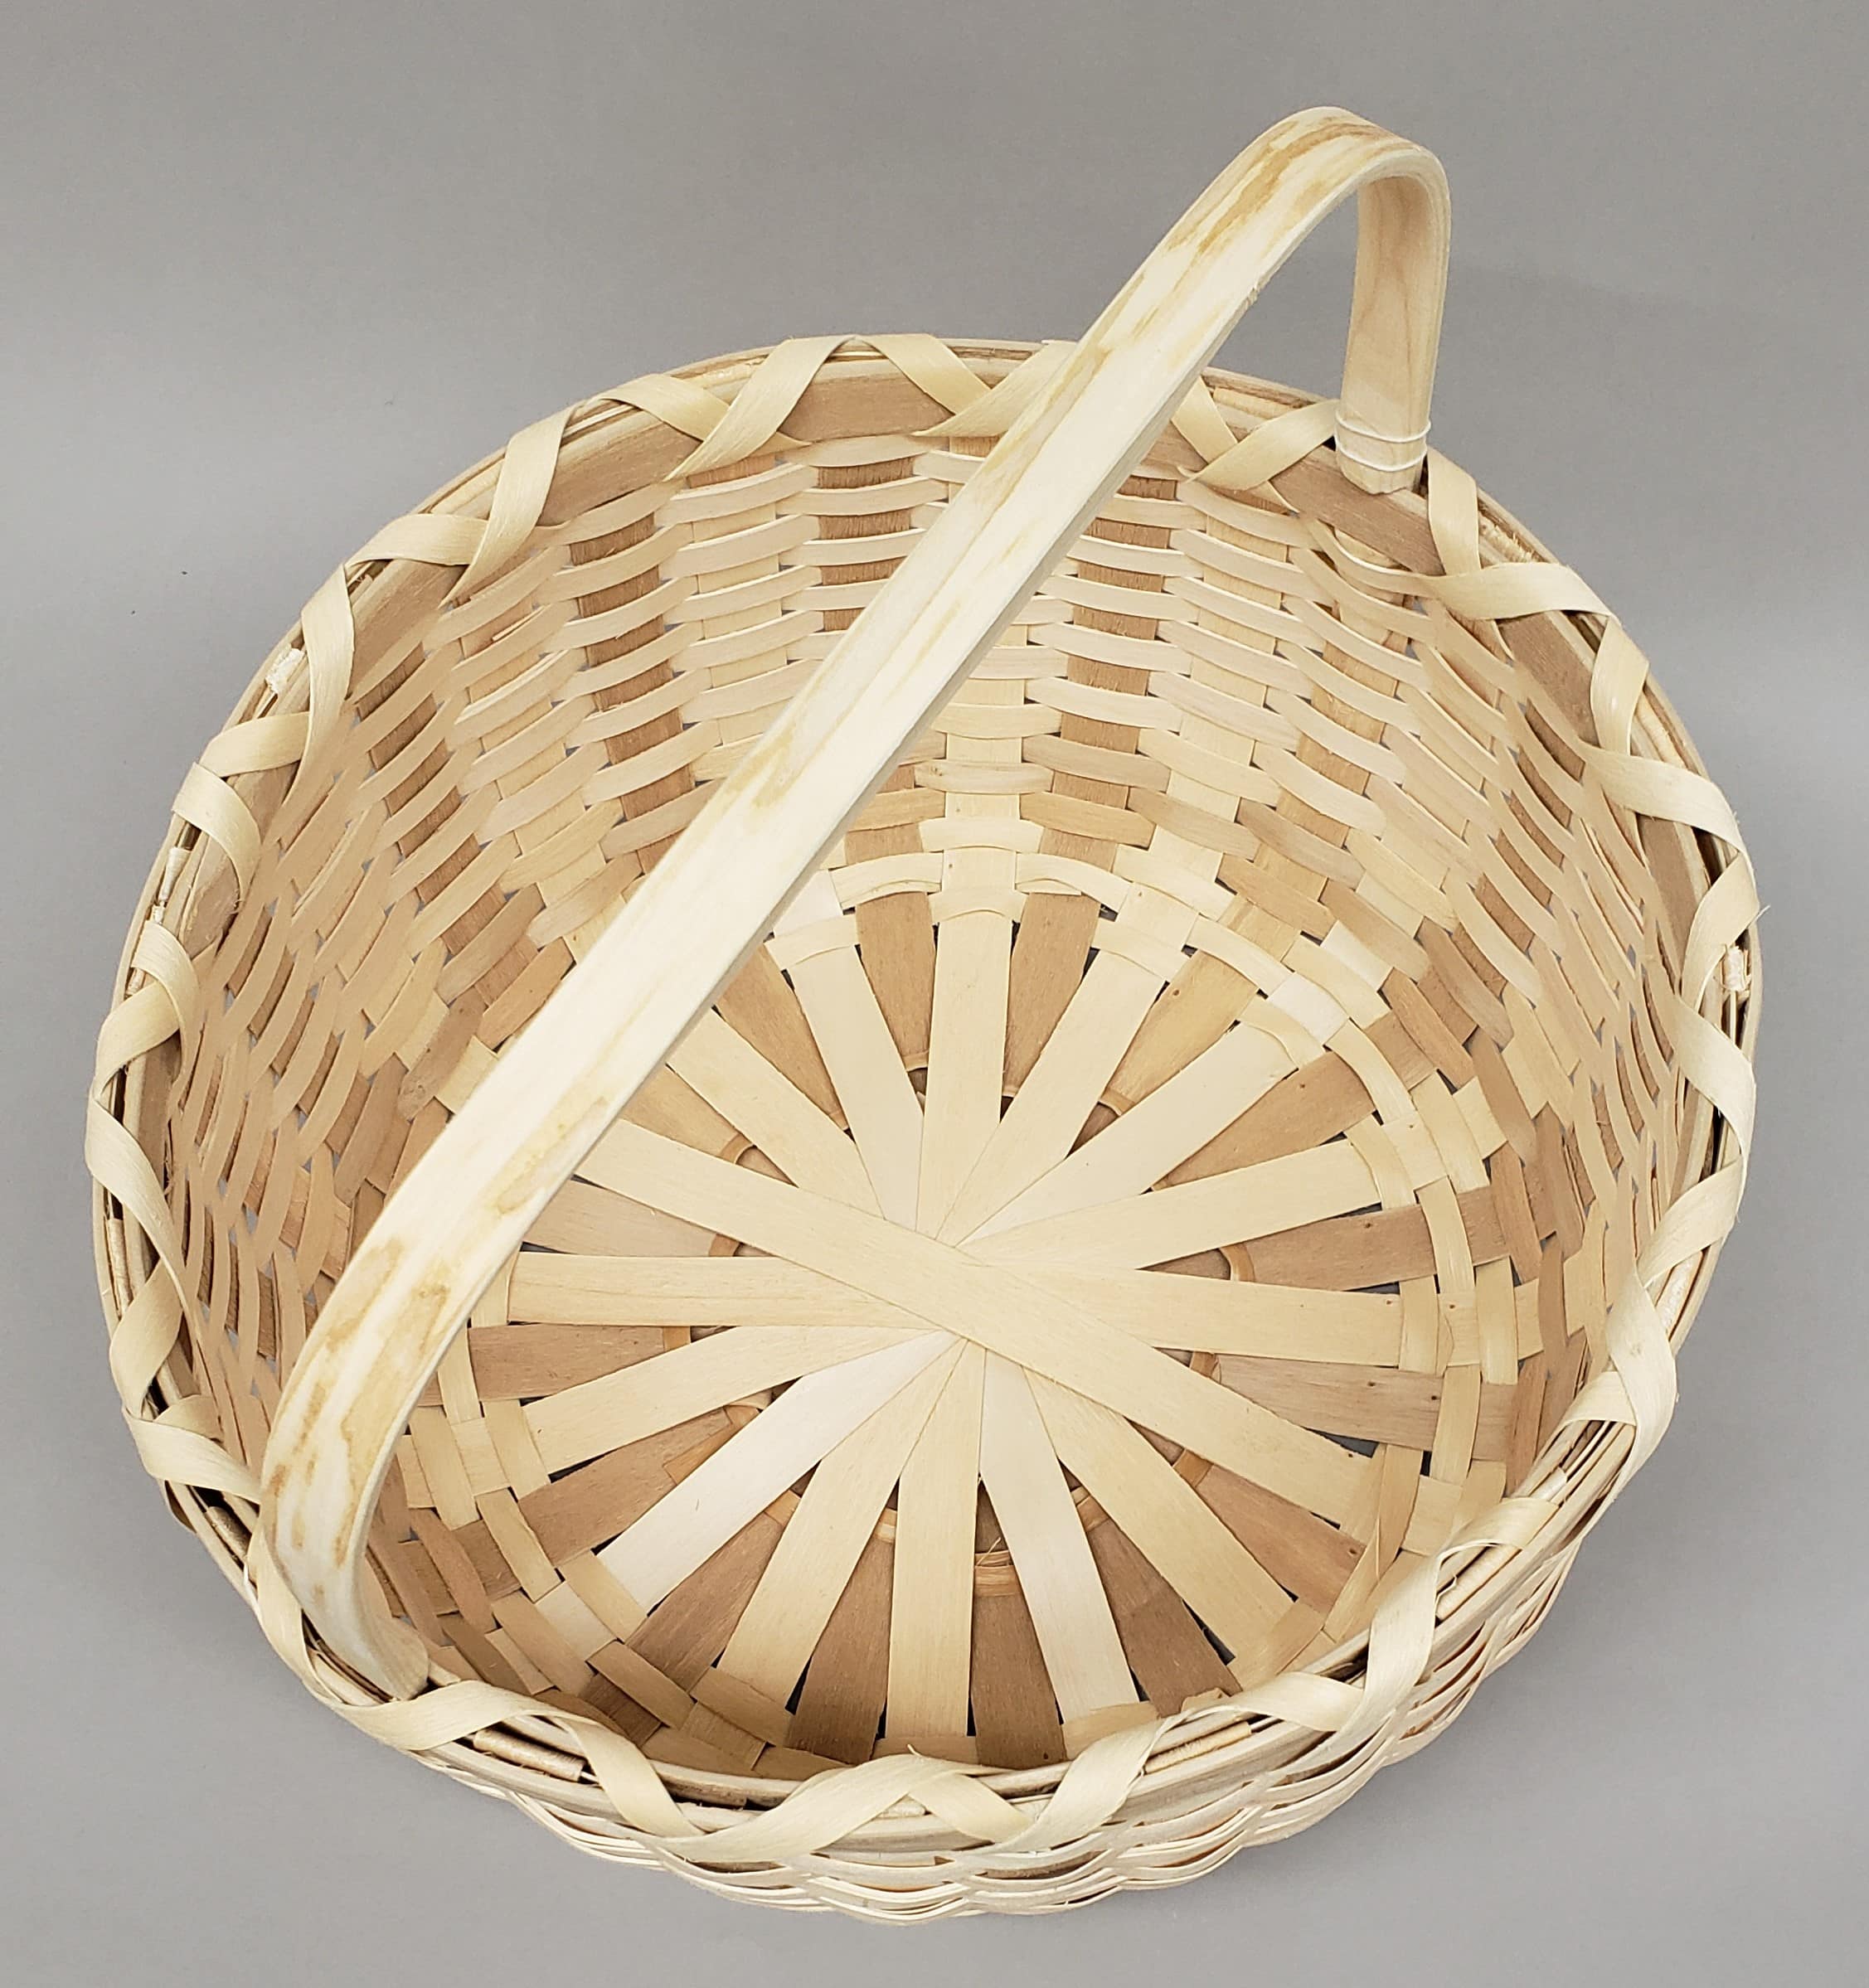 Top view of a round, woven wood basket with a handle on the top.